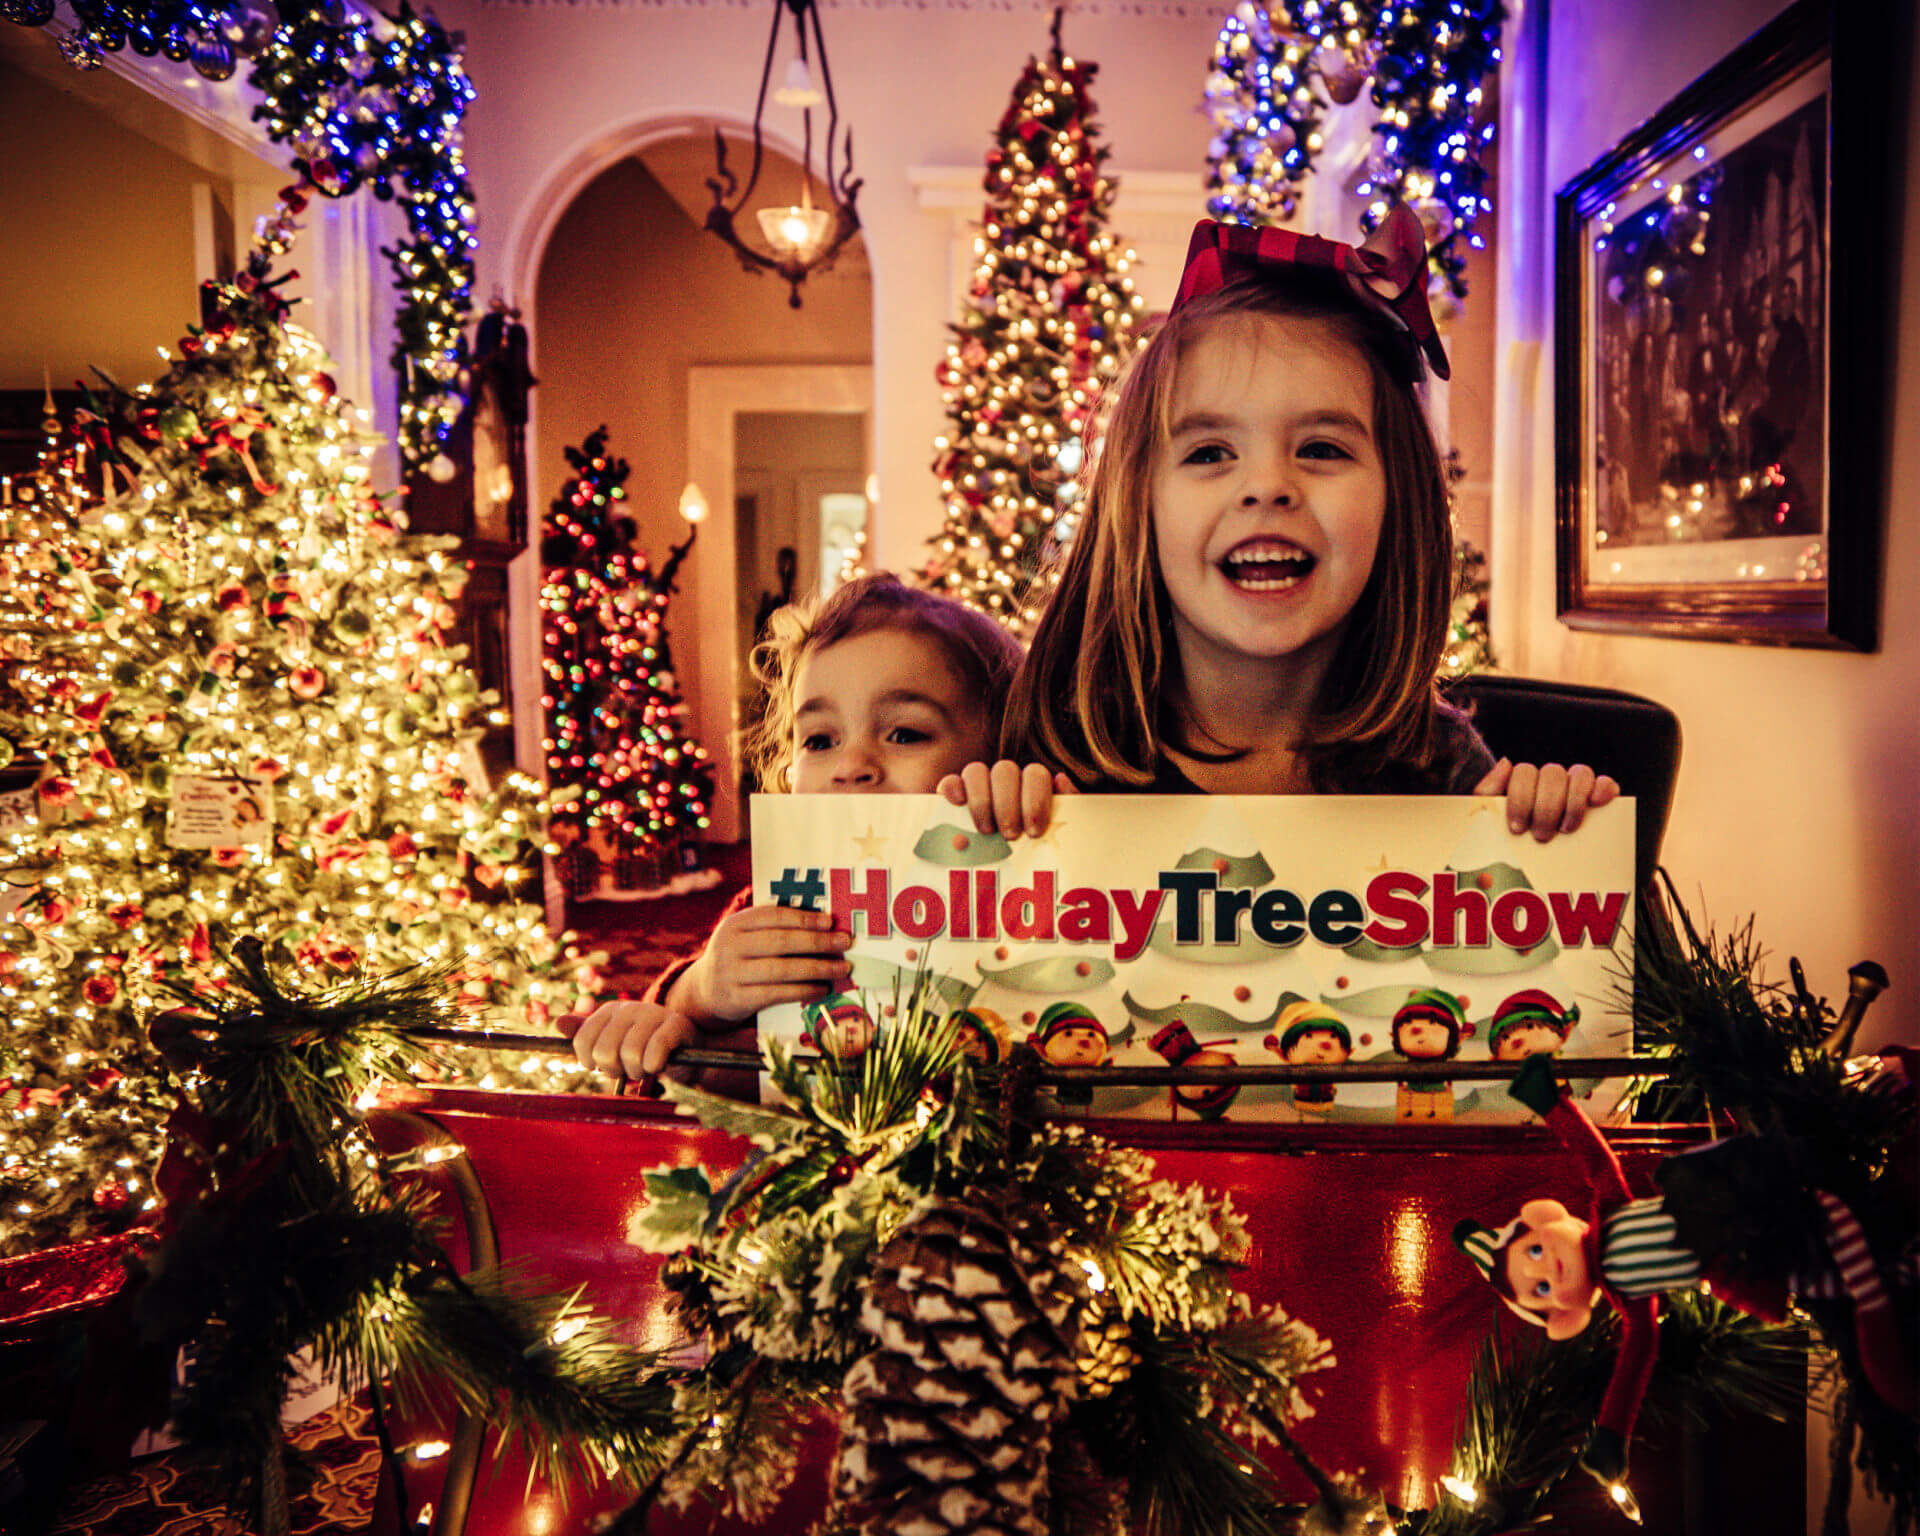 Two young girls hold a sign that says Holiday Tree Show while sitting in a sleigh in a room decorated for the holidays